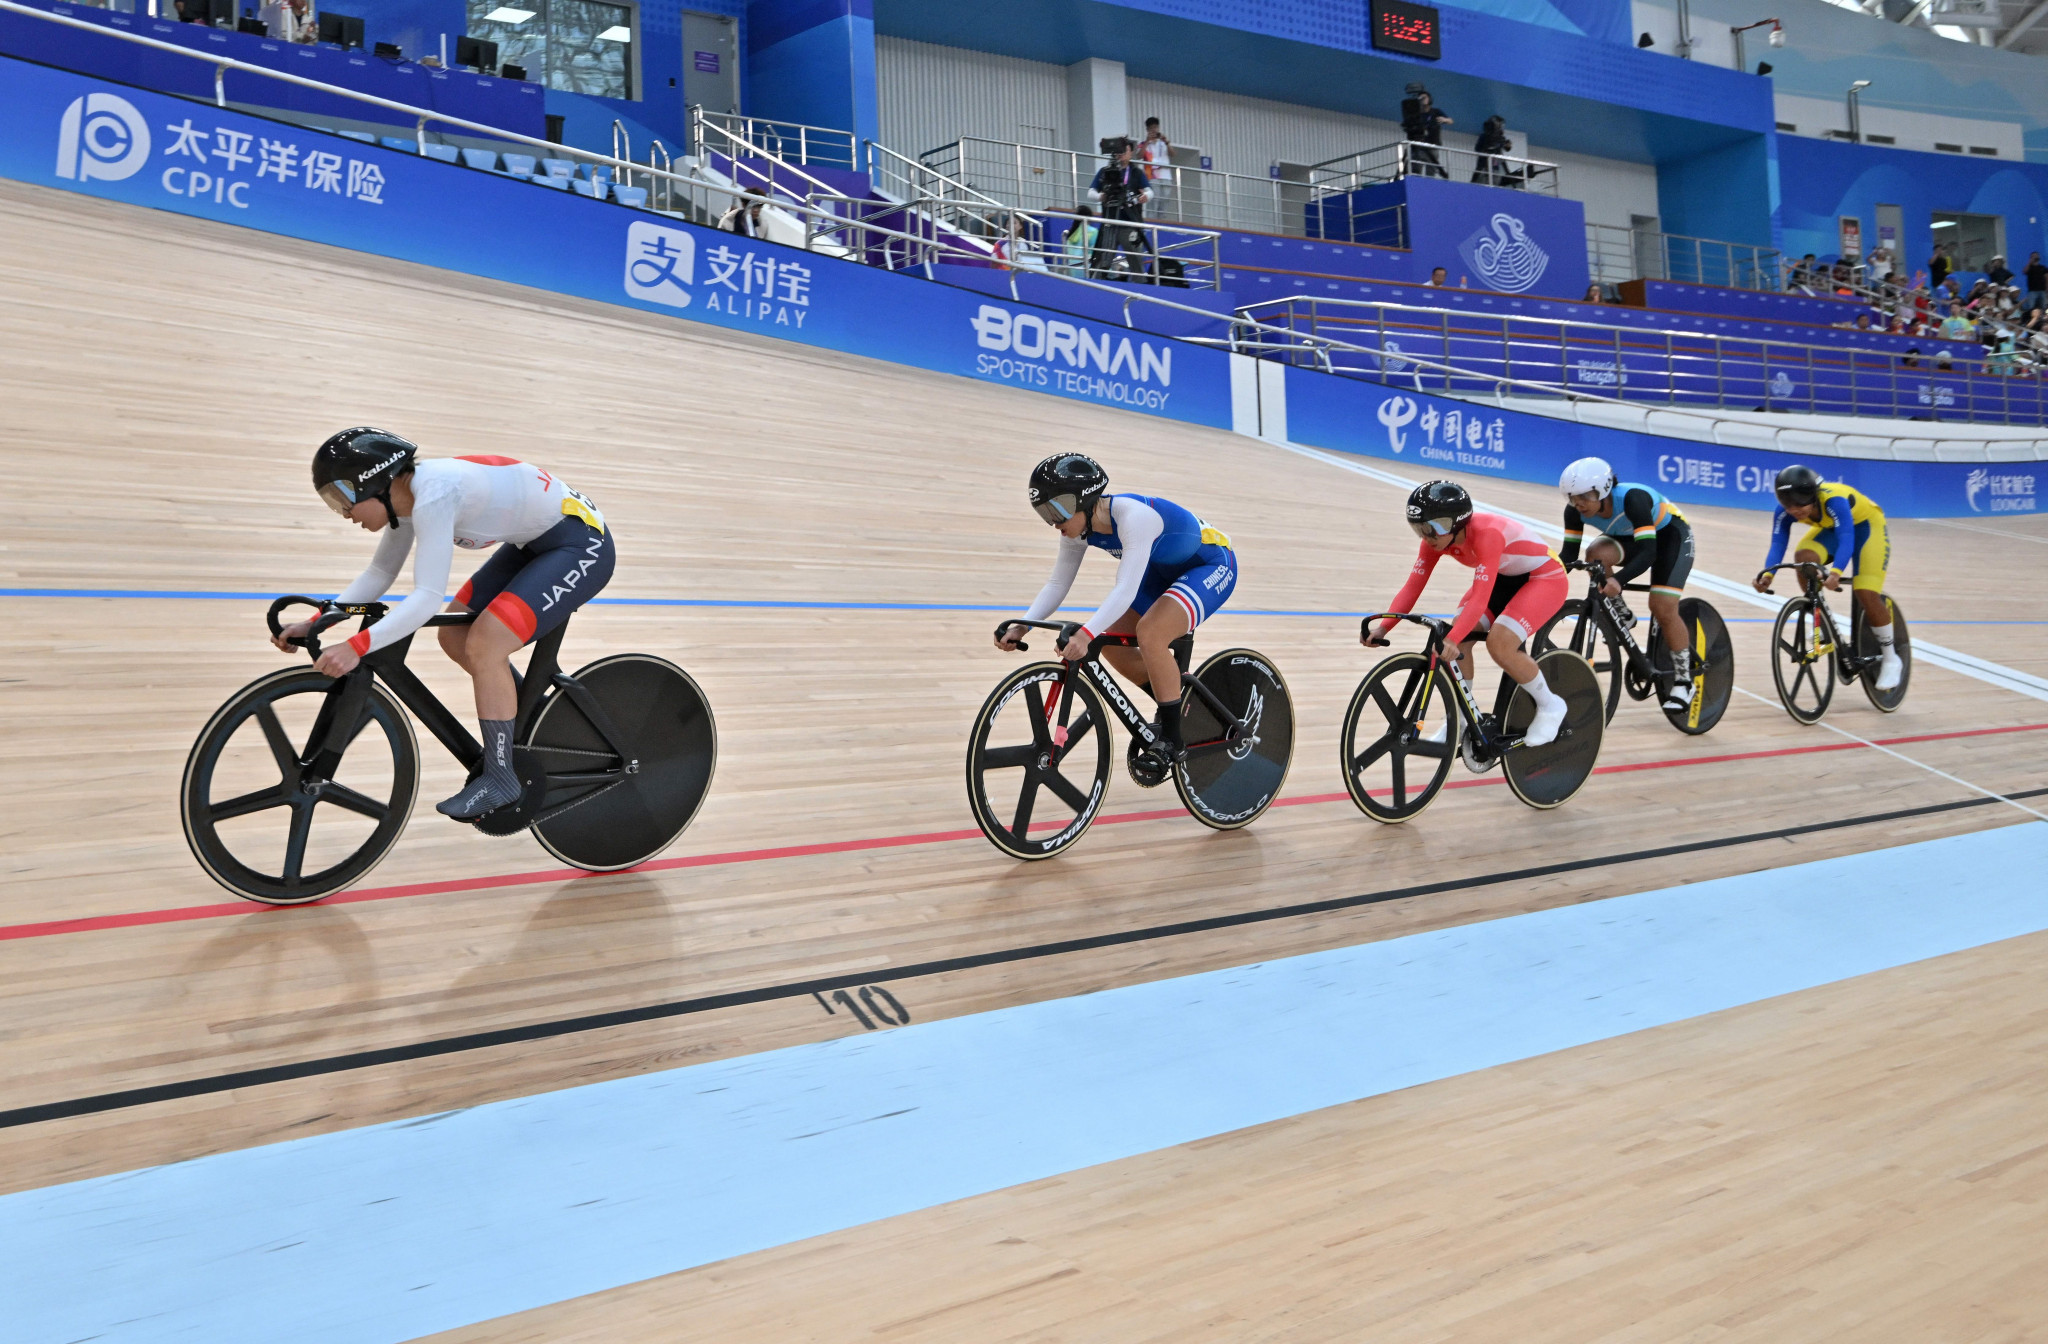 The Chun'an Jieshou Sports Centre Velodrome was built in time for staging the track cycling competition at the Asian Games ©Getty Images